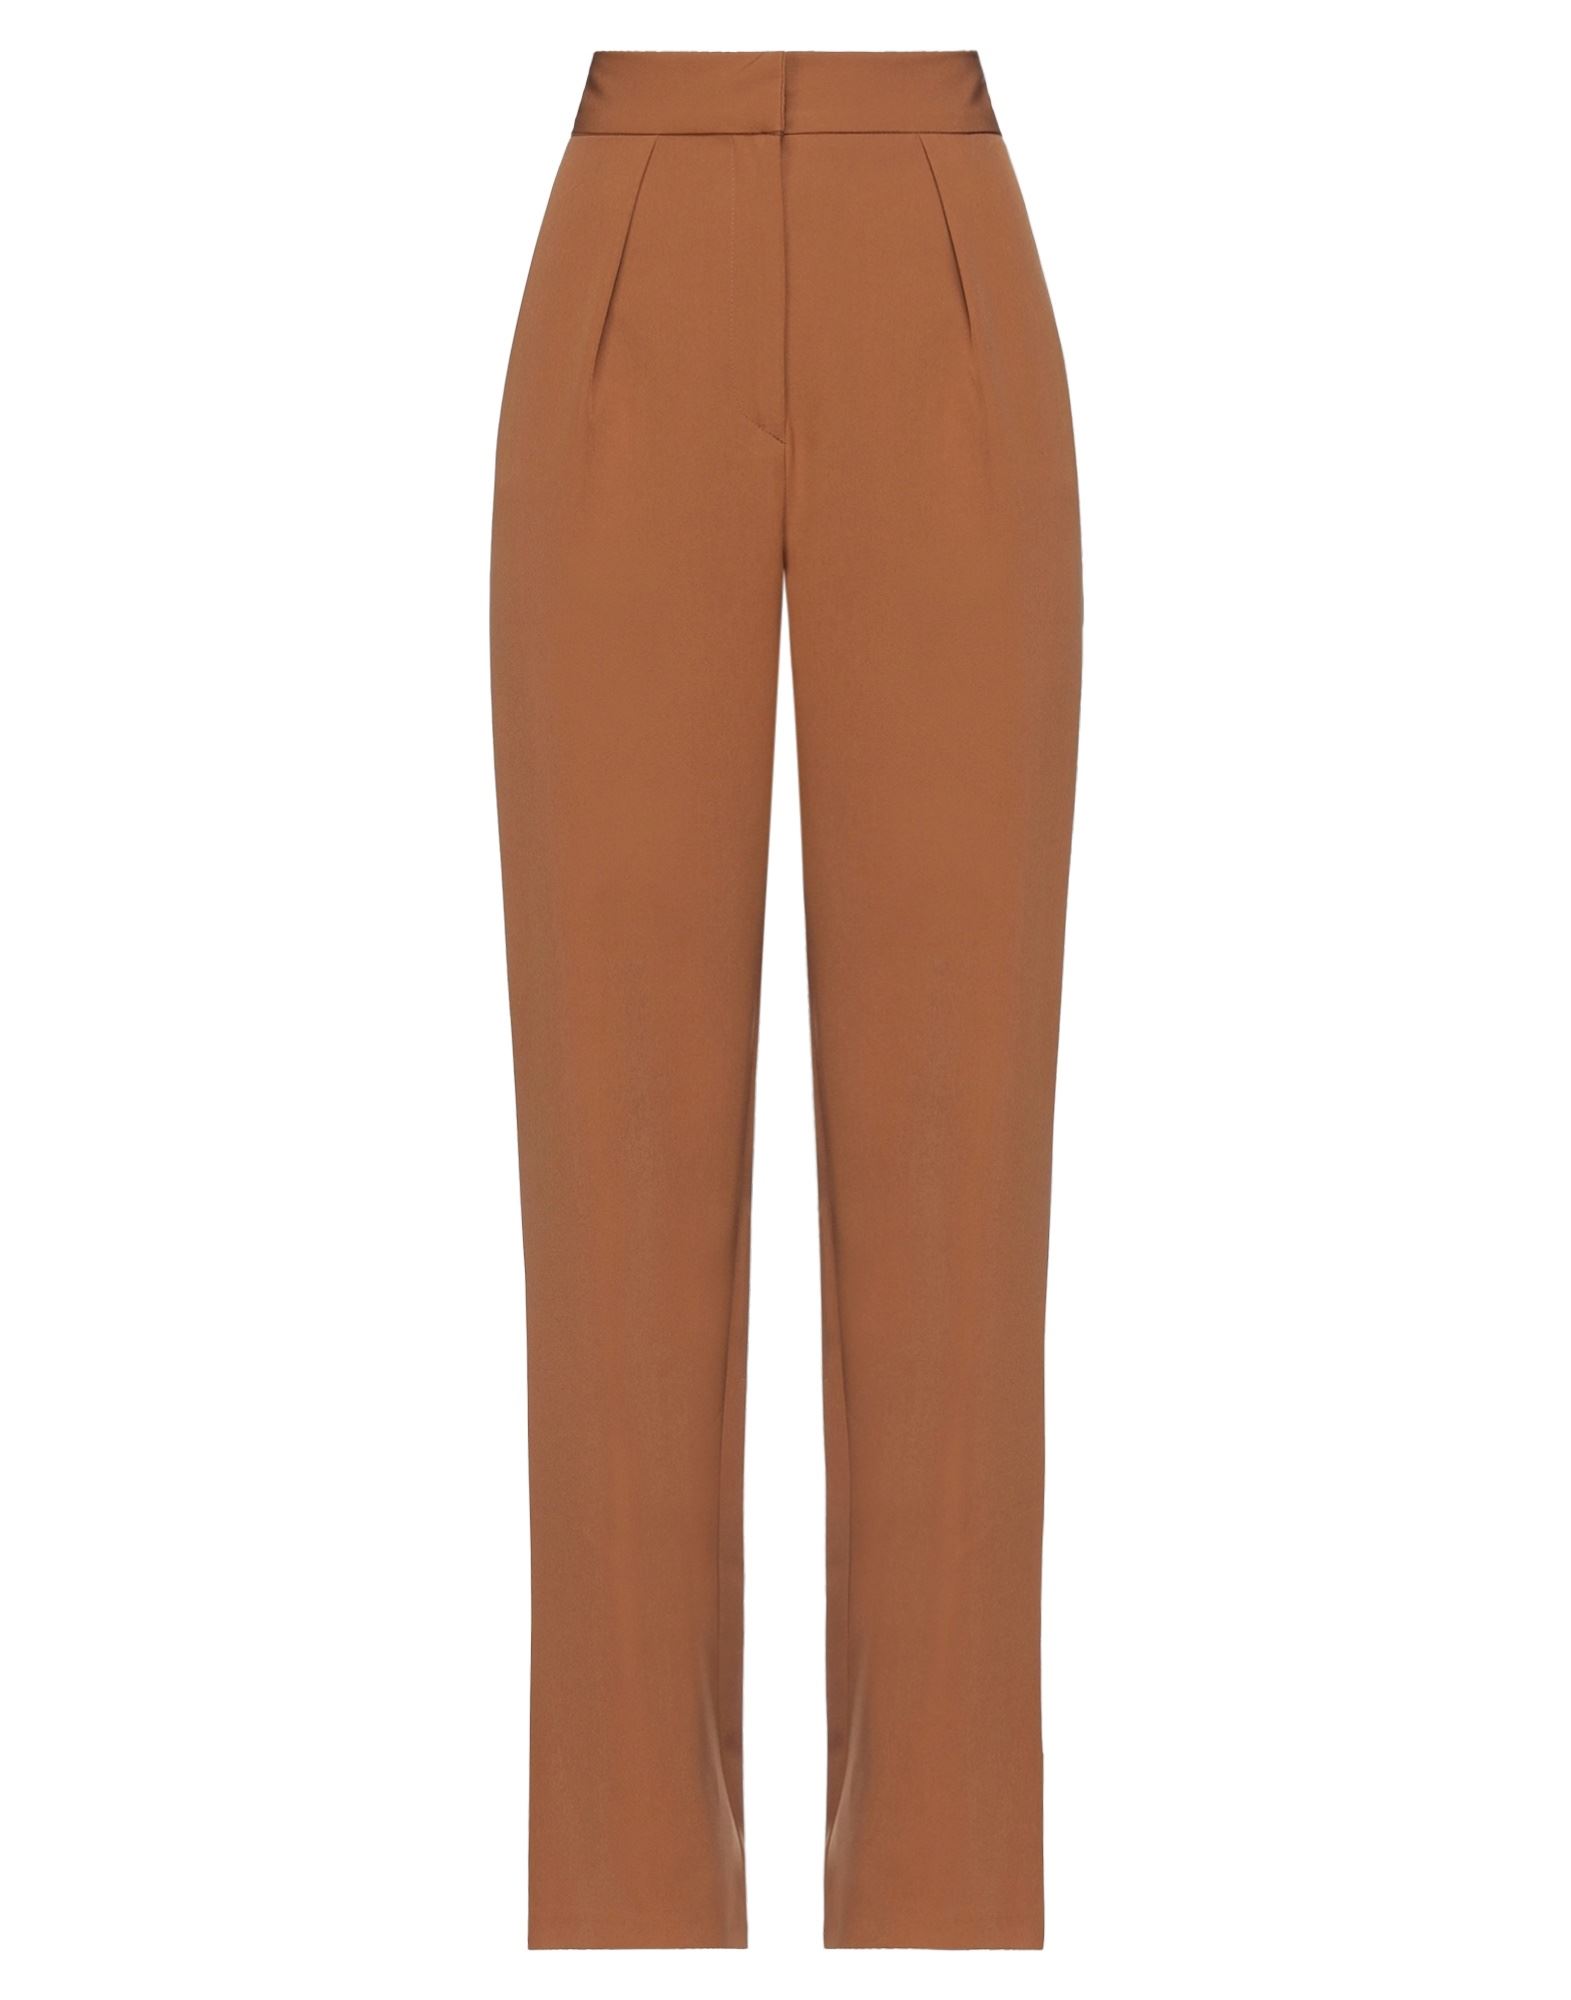 Actualee Pants In Camel